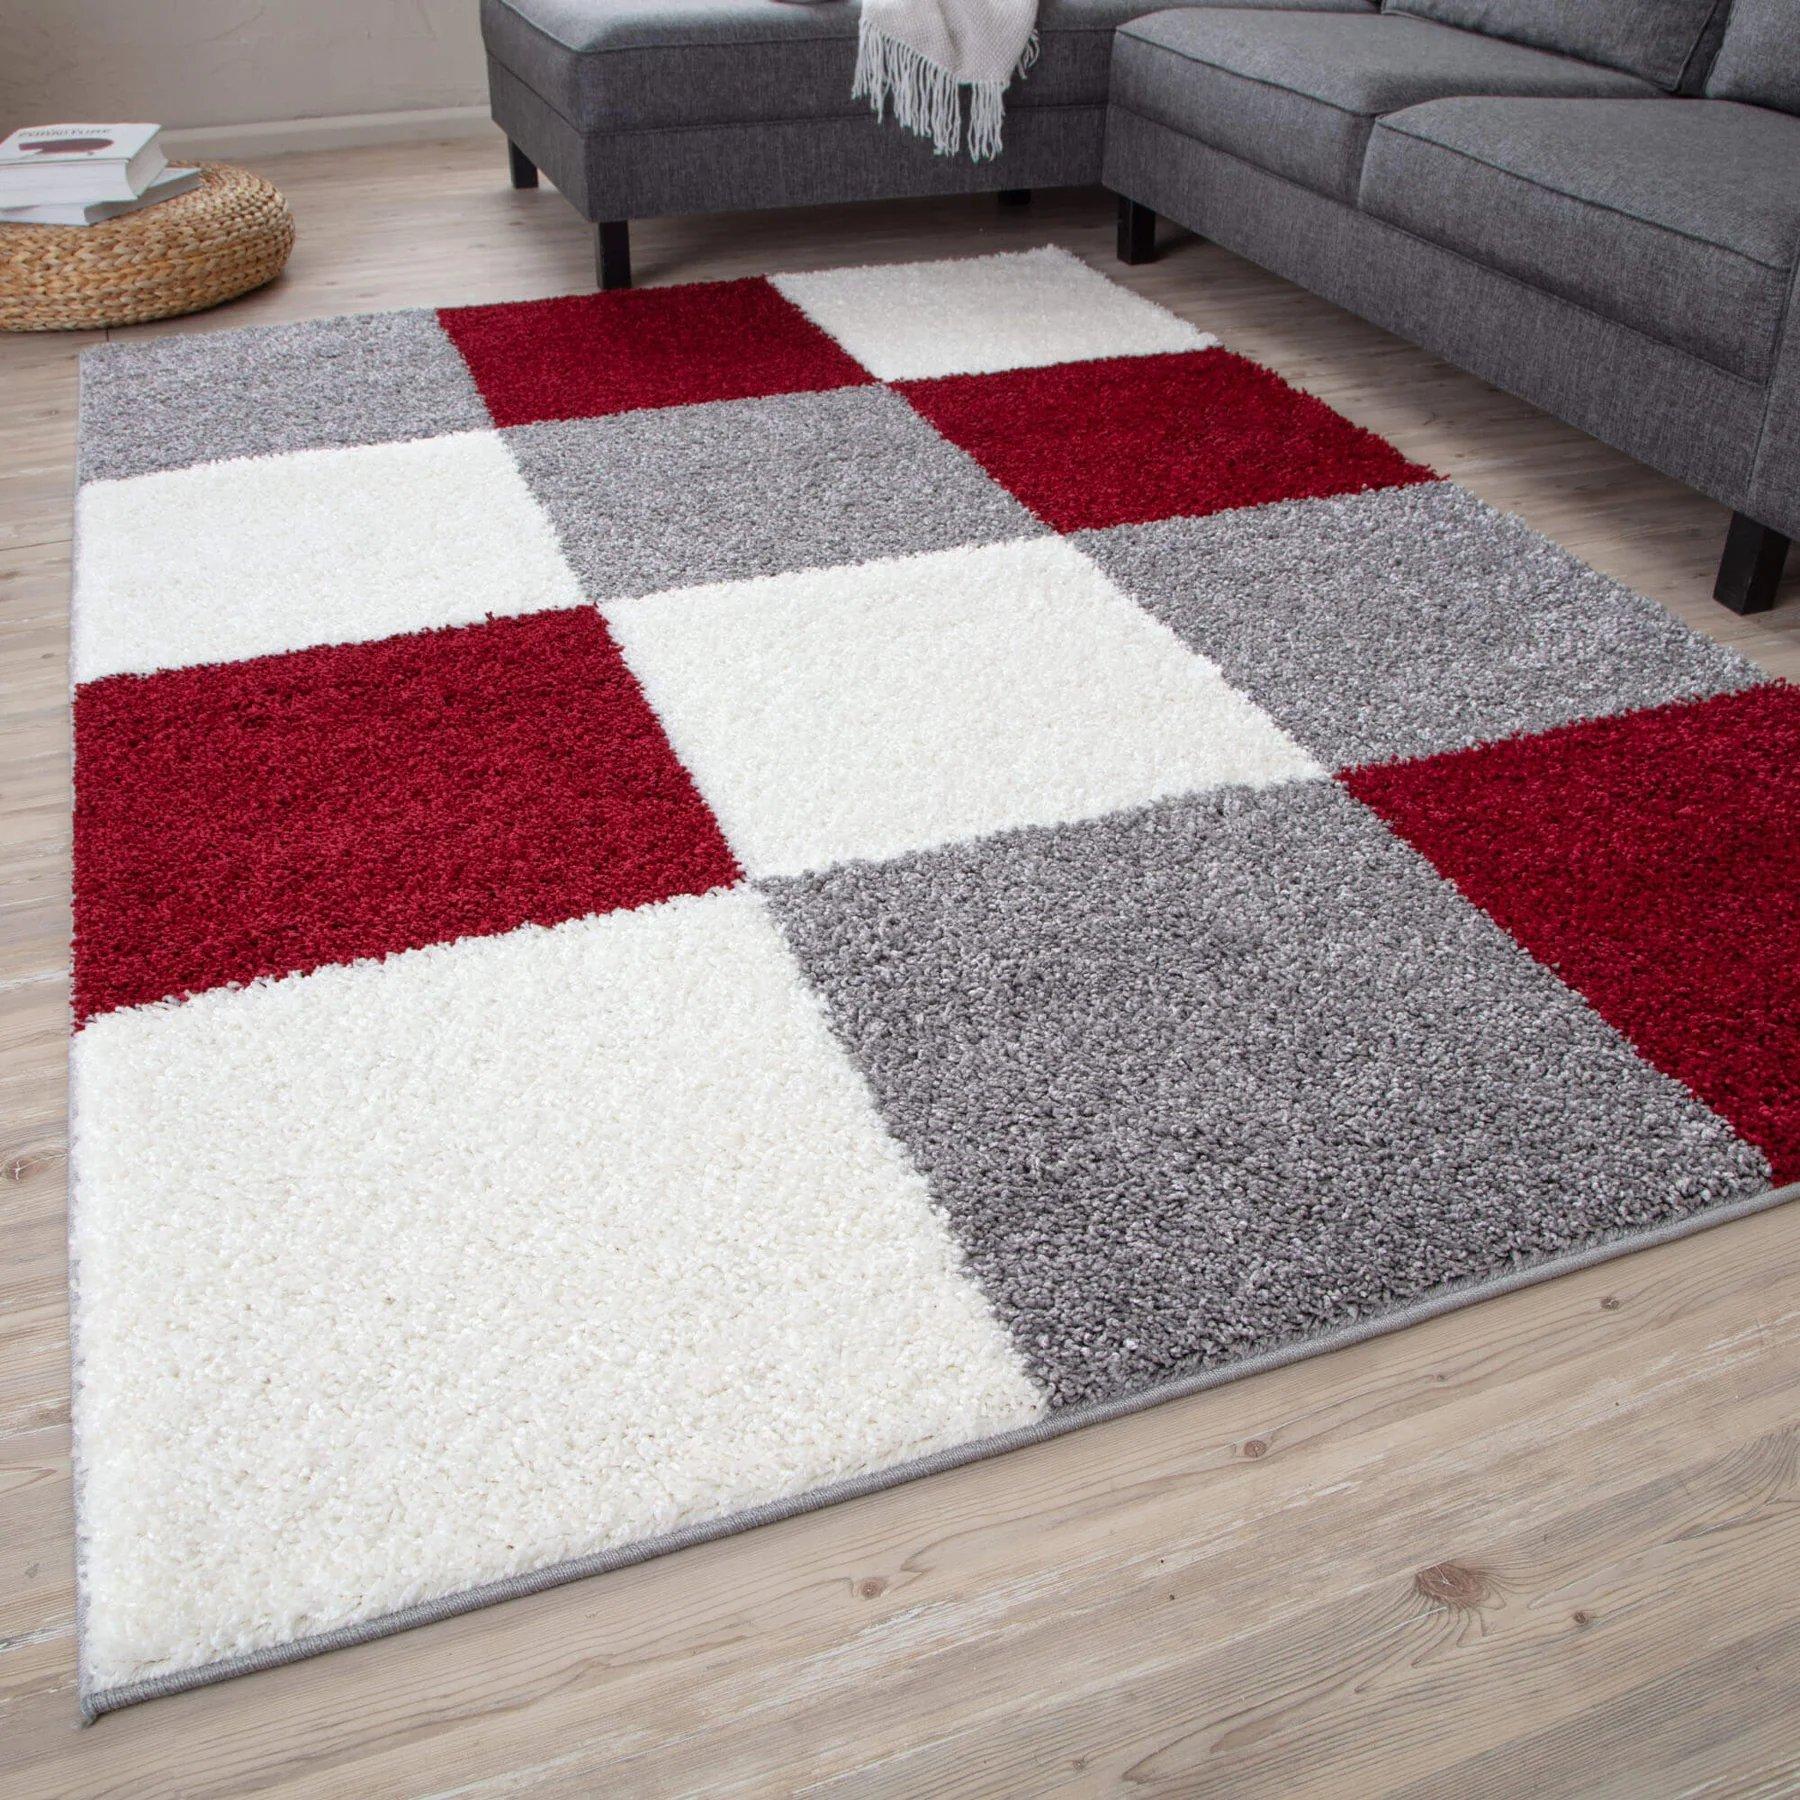 Myshaggy Collection Rugs Geometric Design - 381 Red